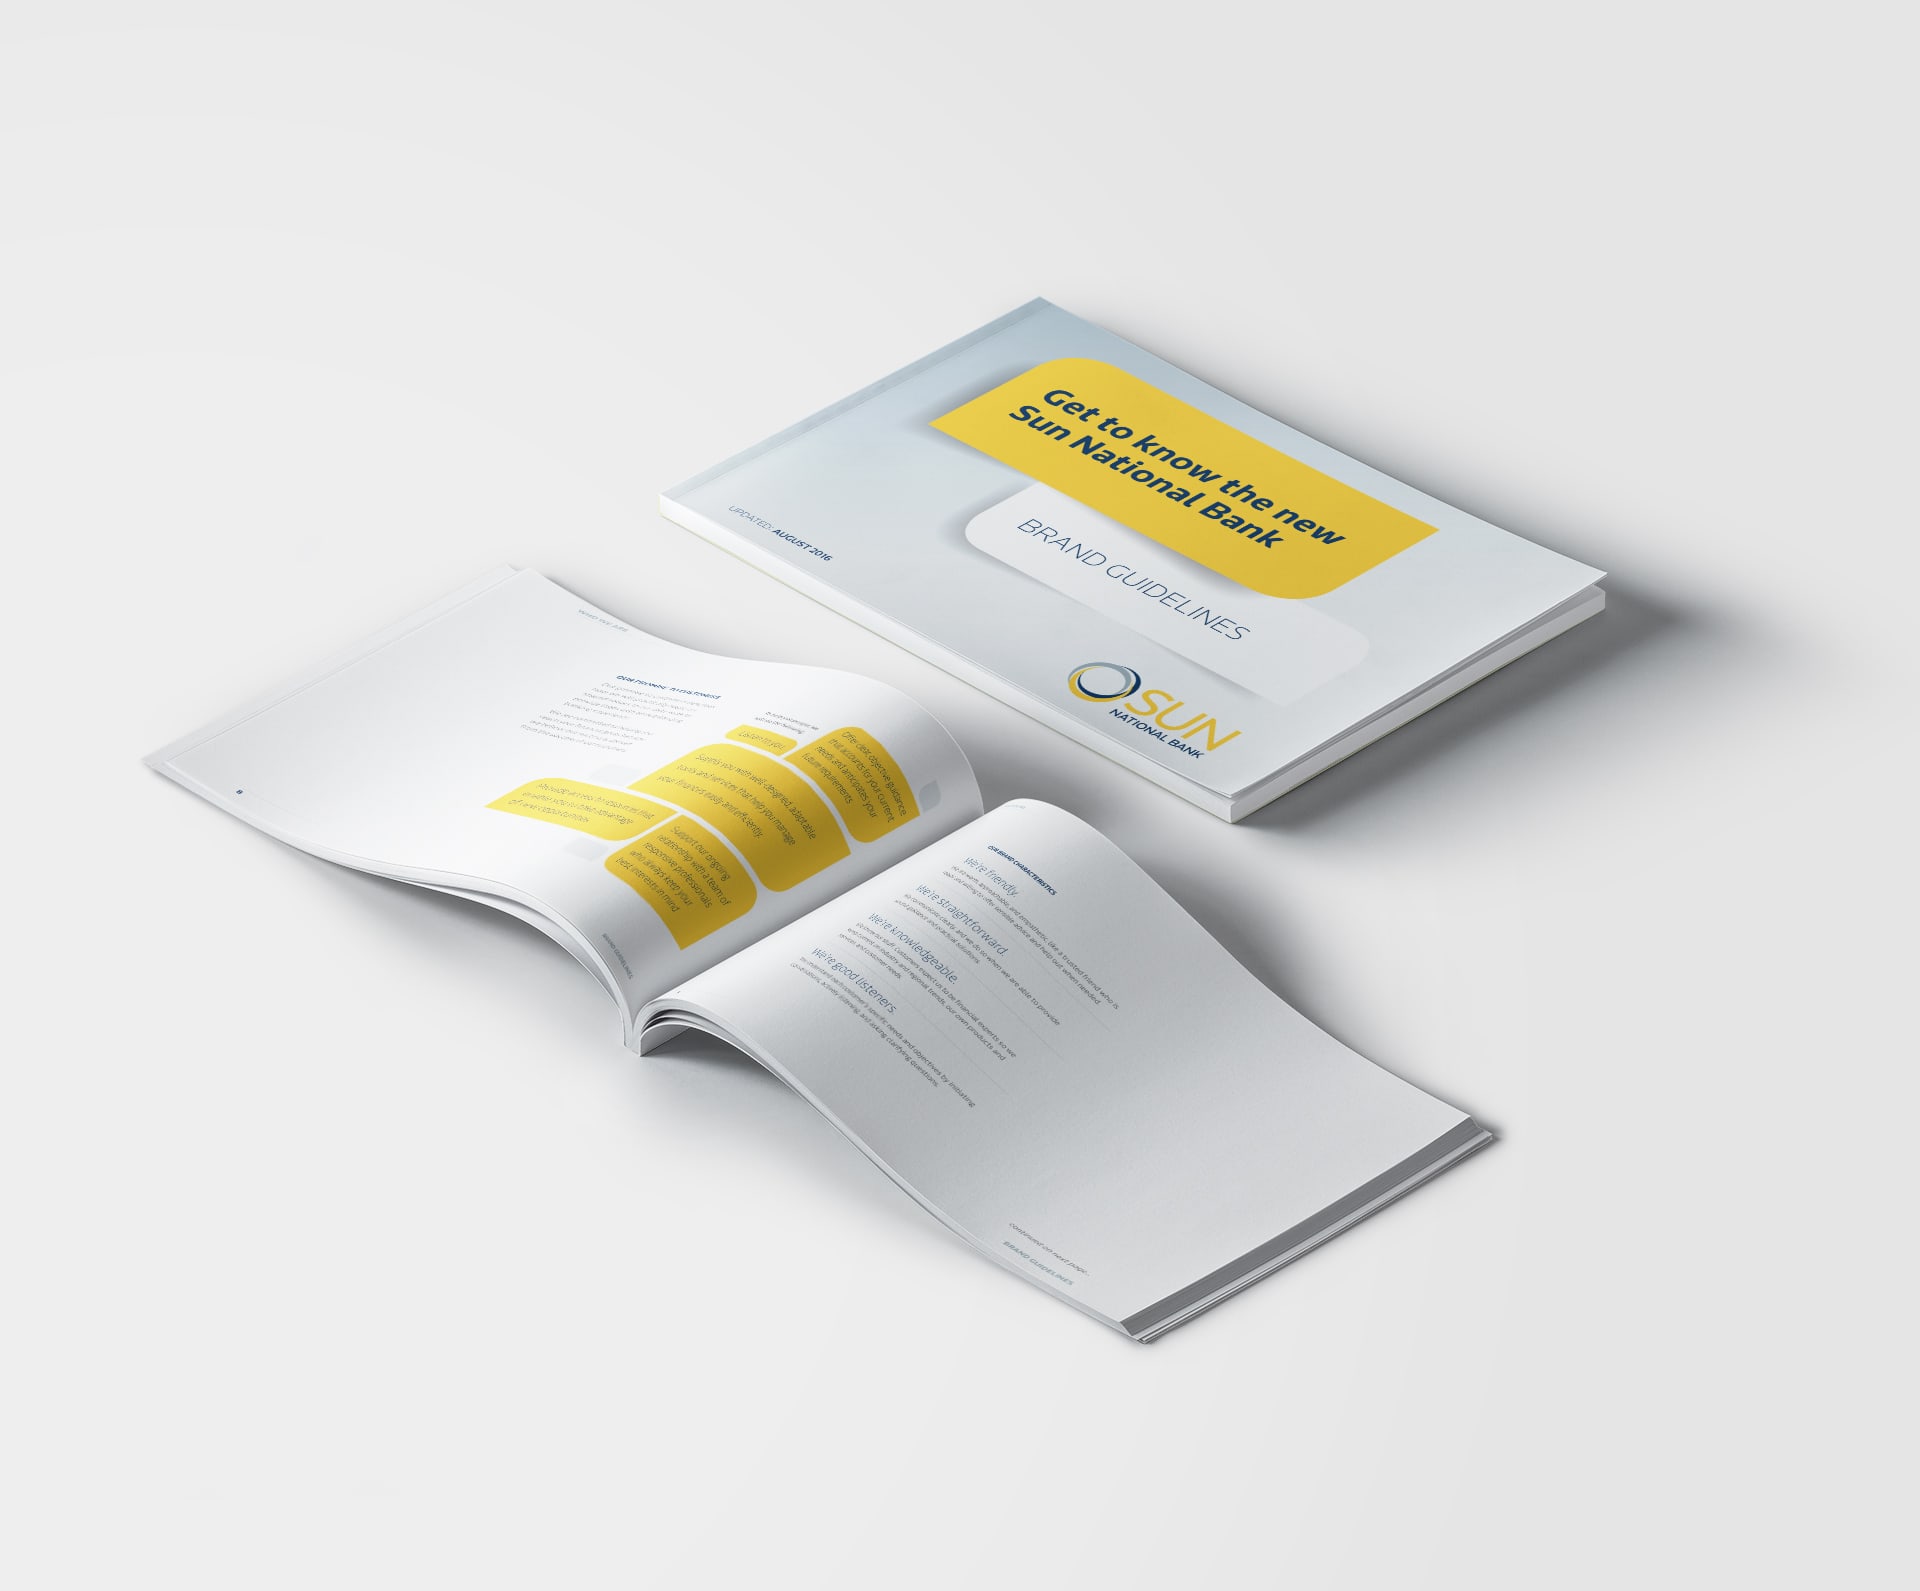 Sun National Bank brand guidelines